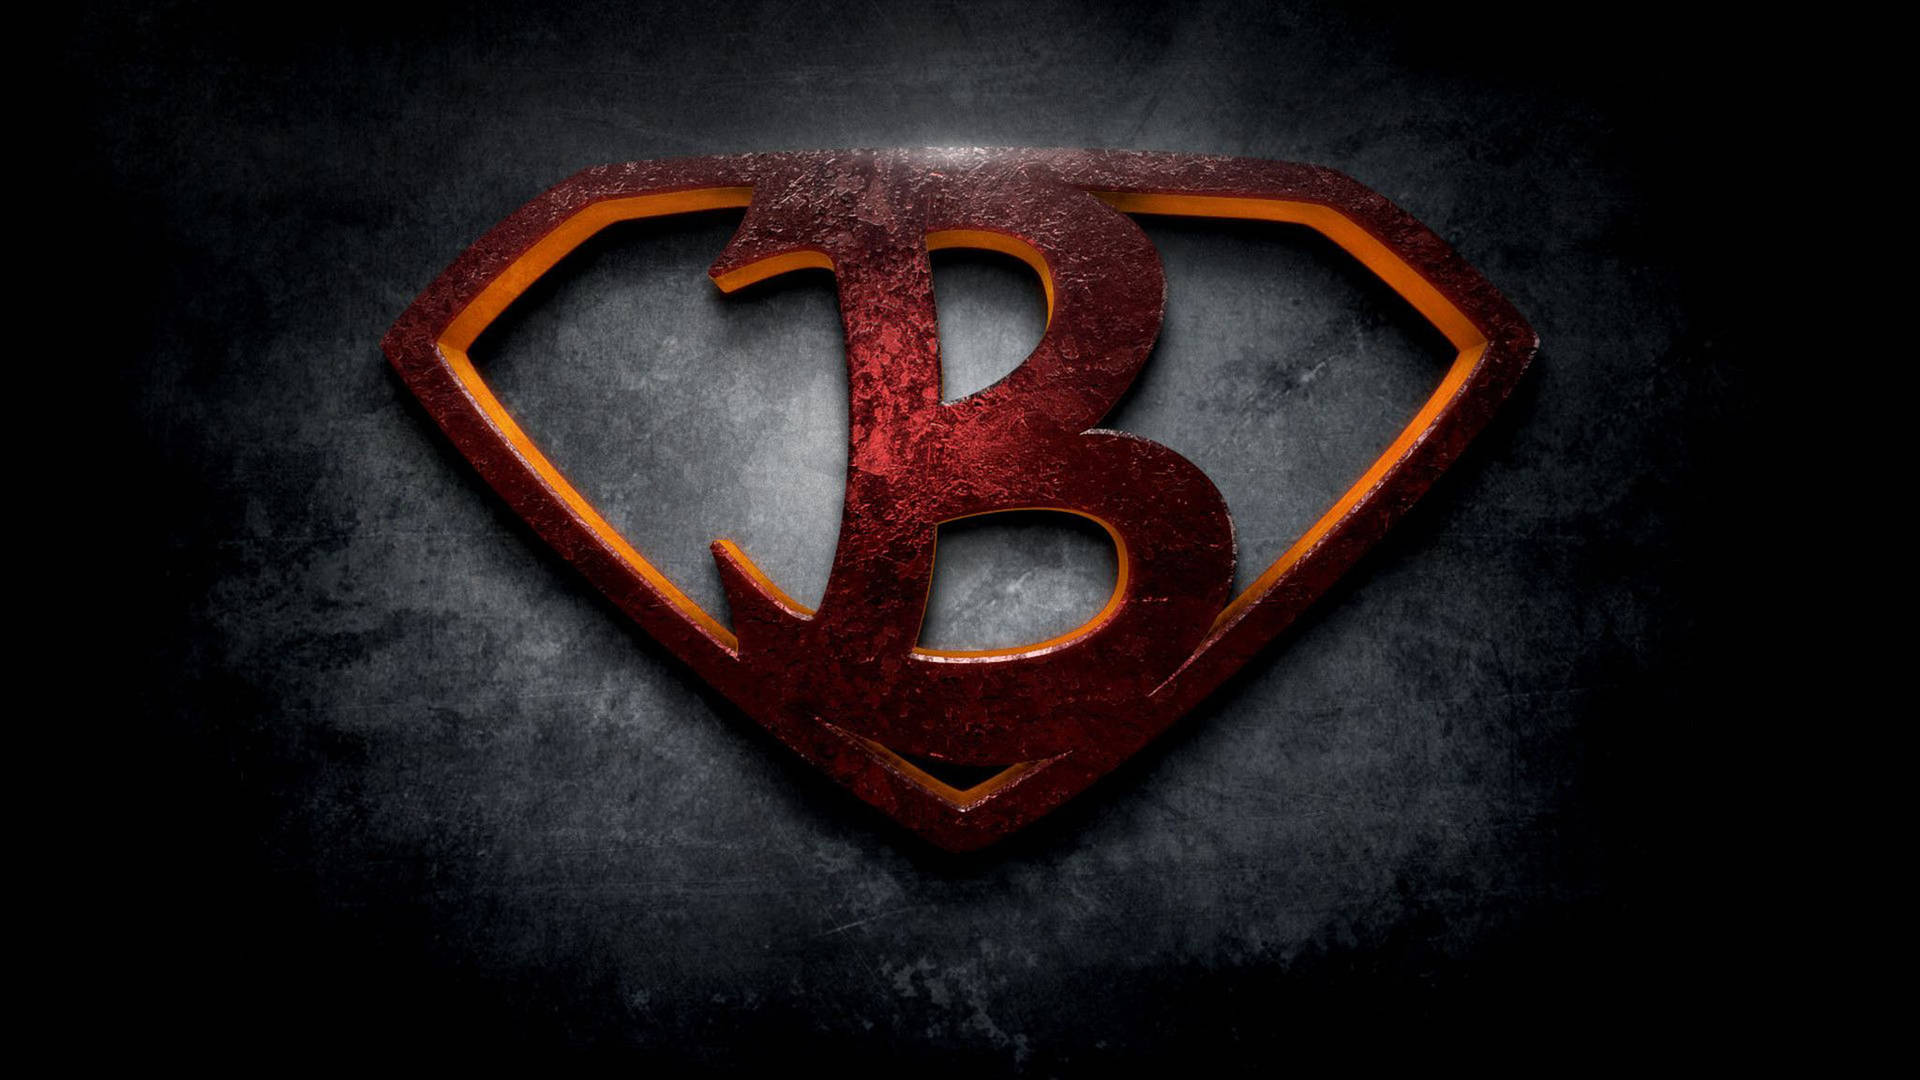 Free Letter B Wallpaper Downloads, [100+] Letter B Wallpapers for FREE |  